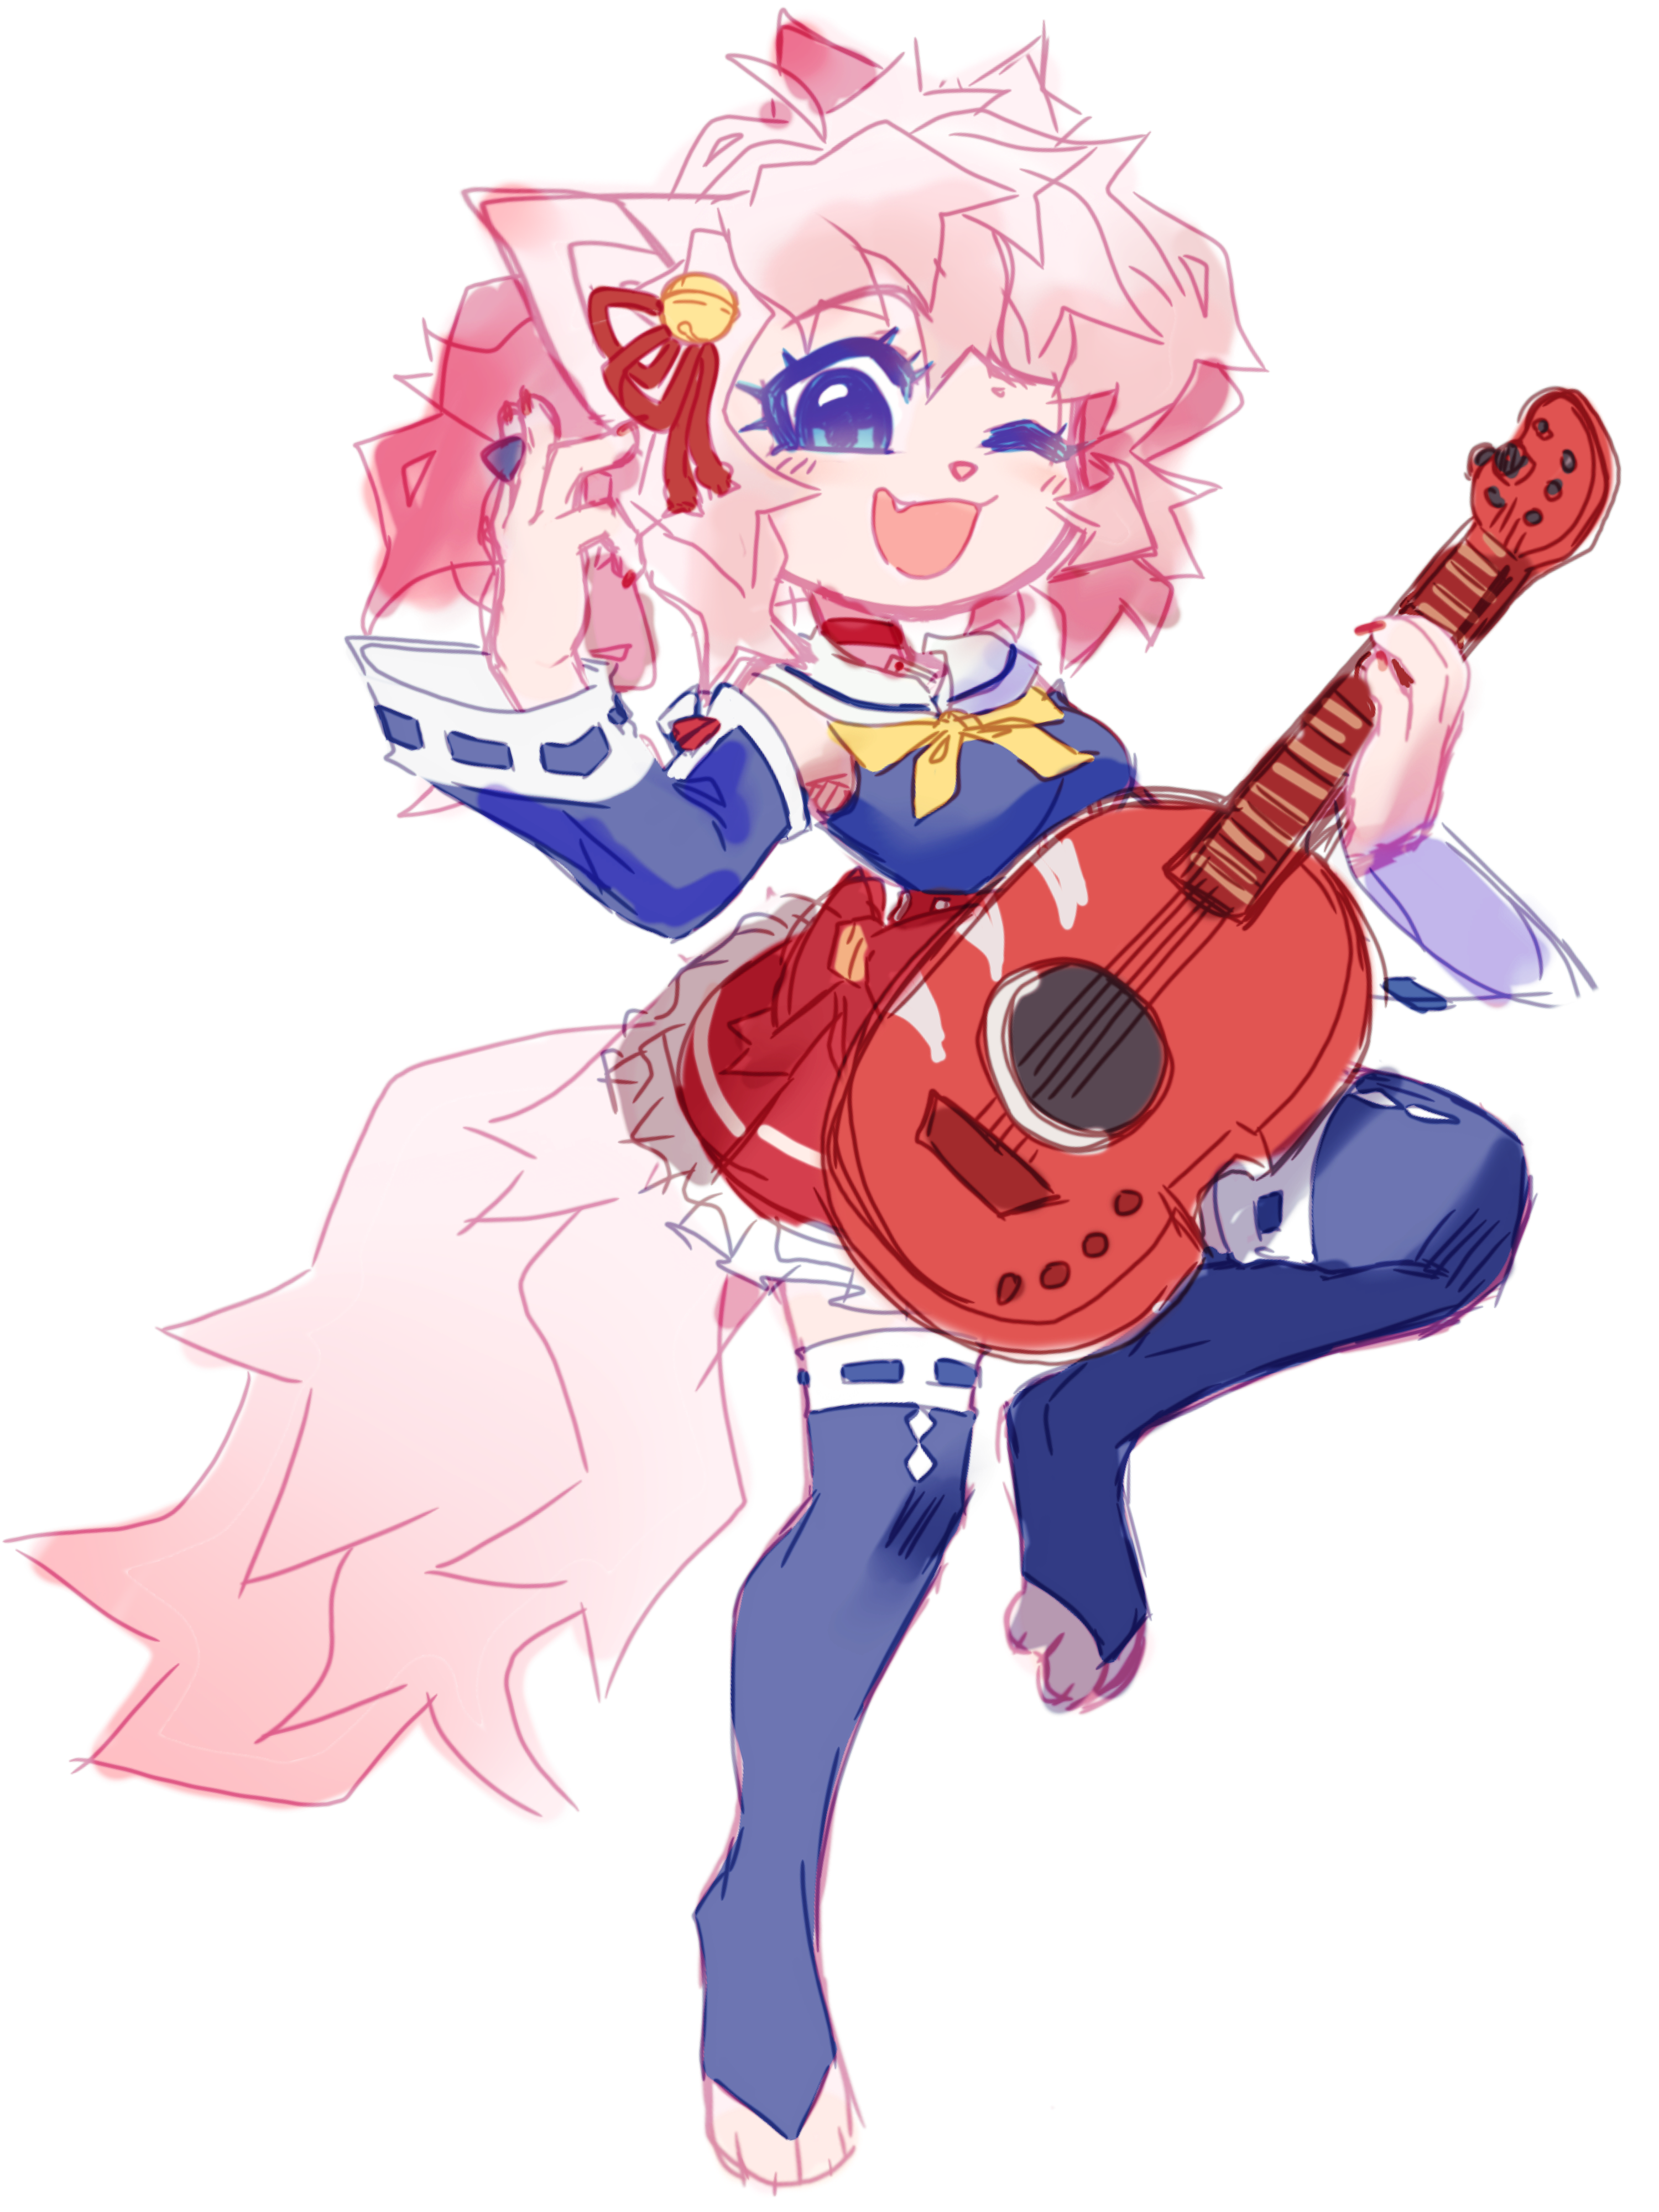 Myself as a Show By Rock!! character by BishounenHideto on DeviantArt